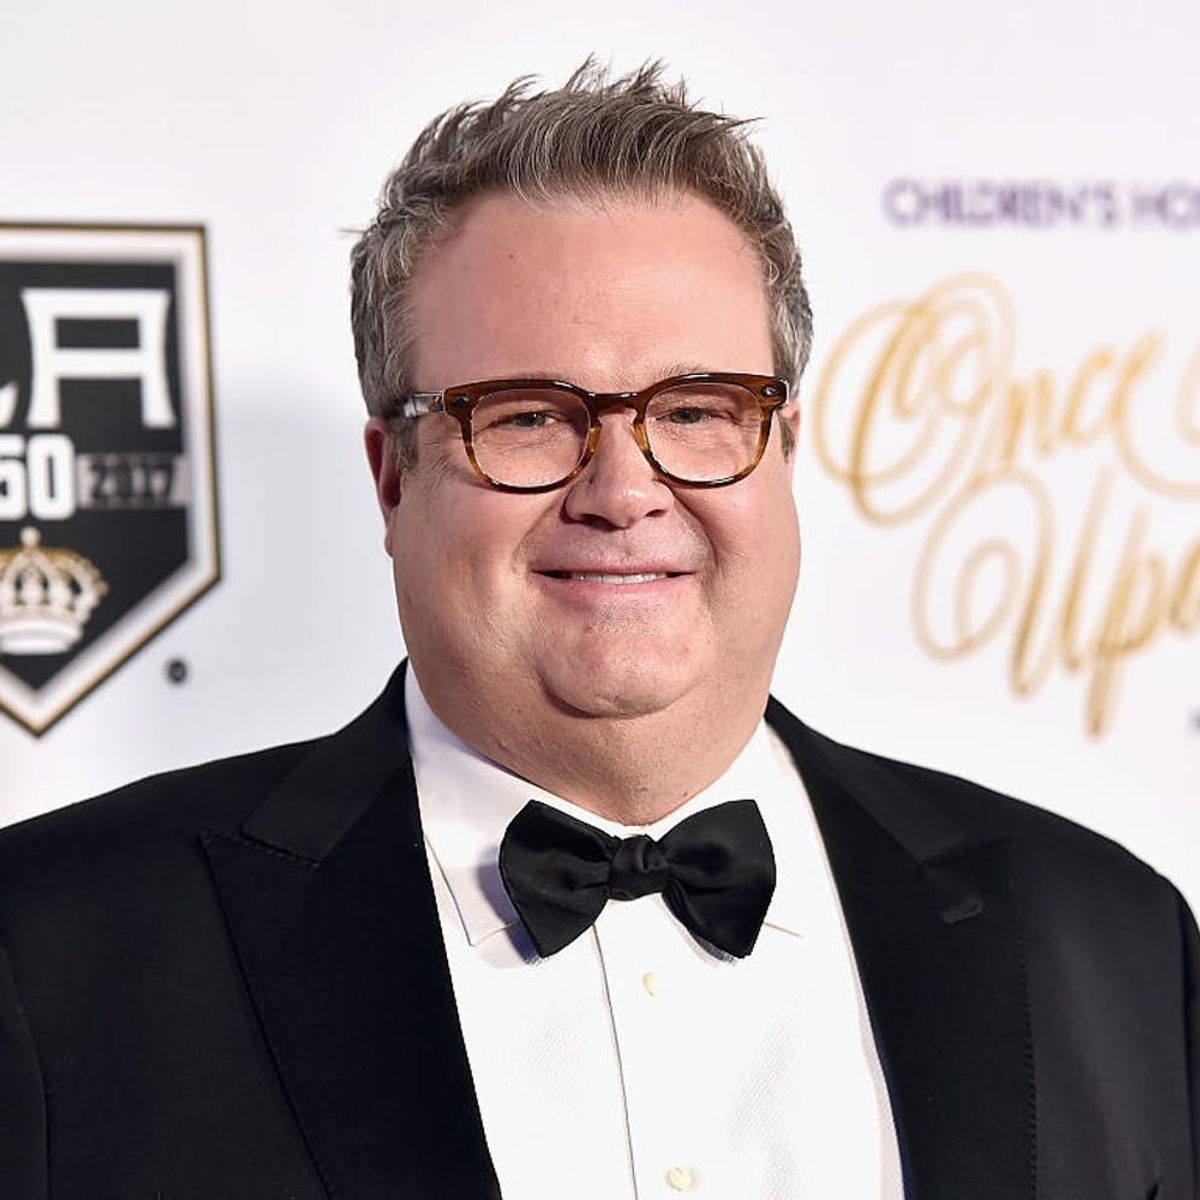 Modern Family’s Eric Stonestreet Once Worked as a Bodyguard for Garth Brooks